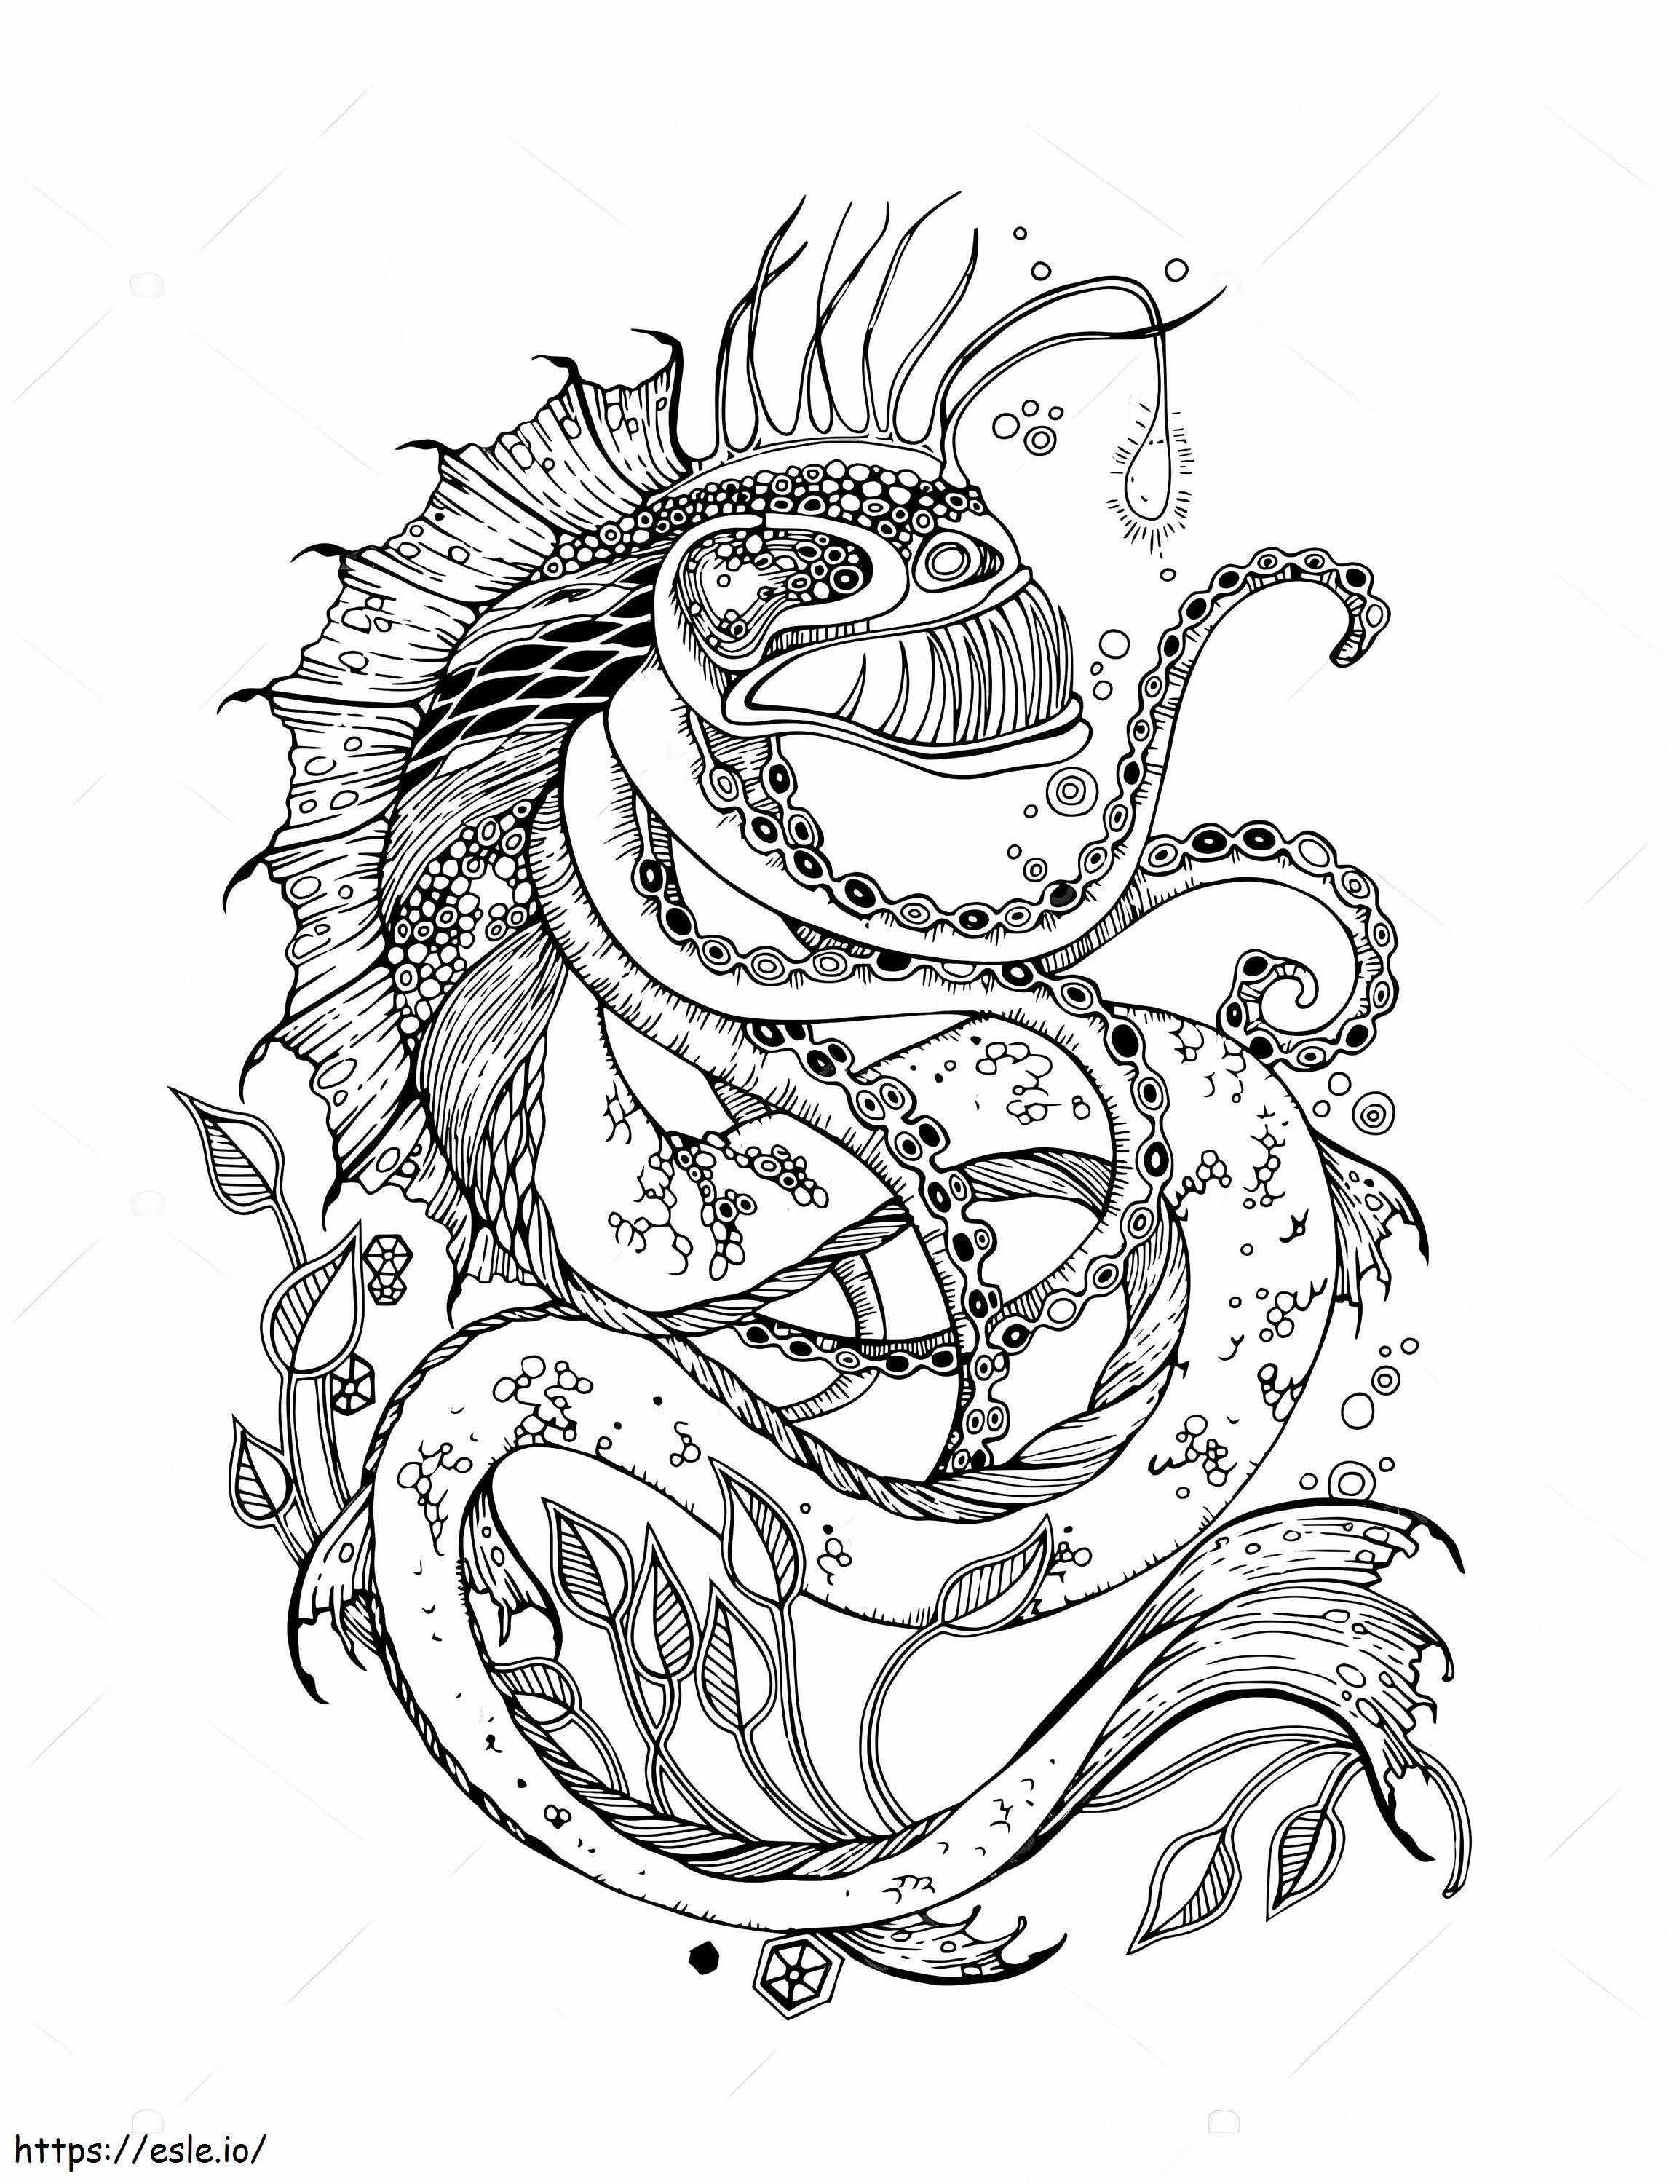 Stunning Sea Serpent coloring page